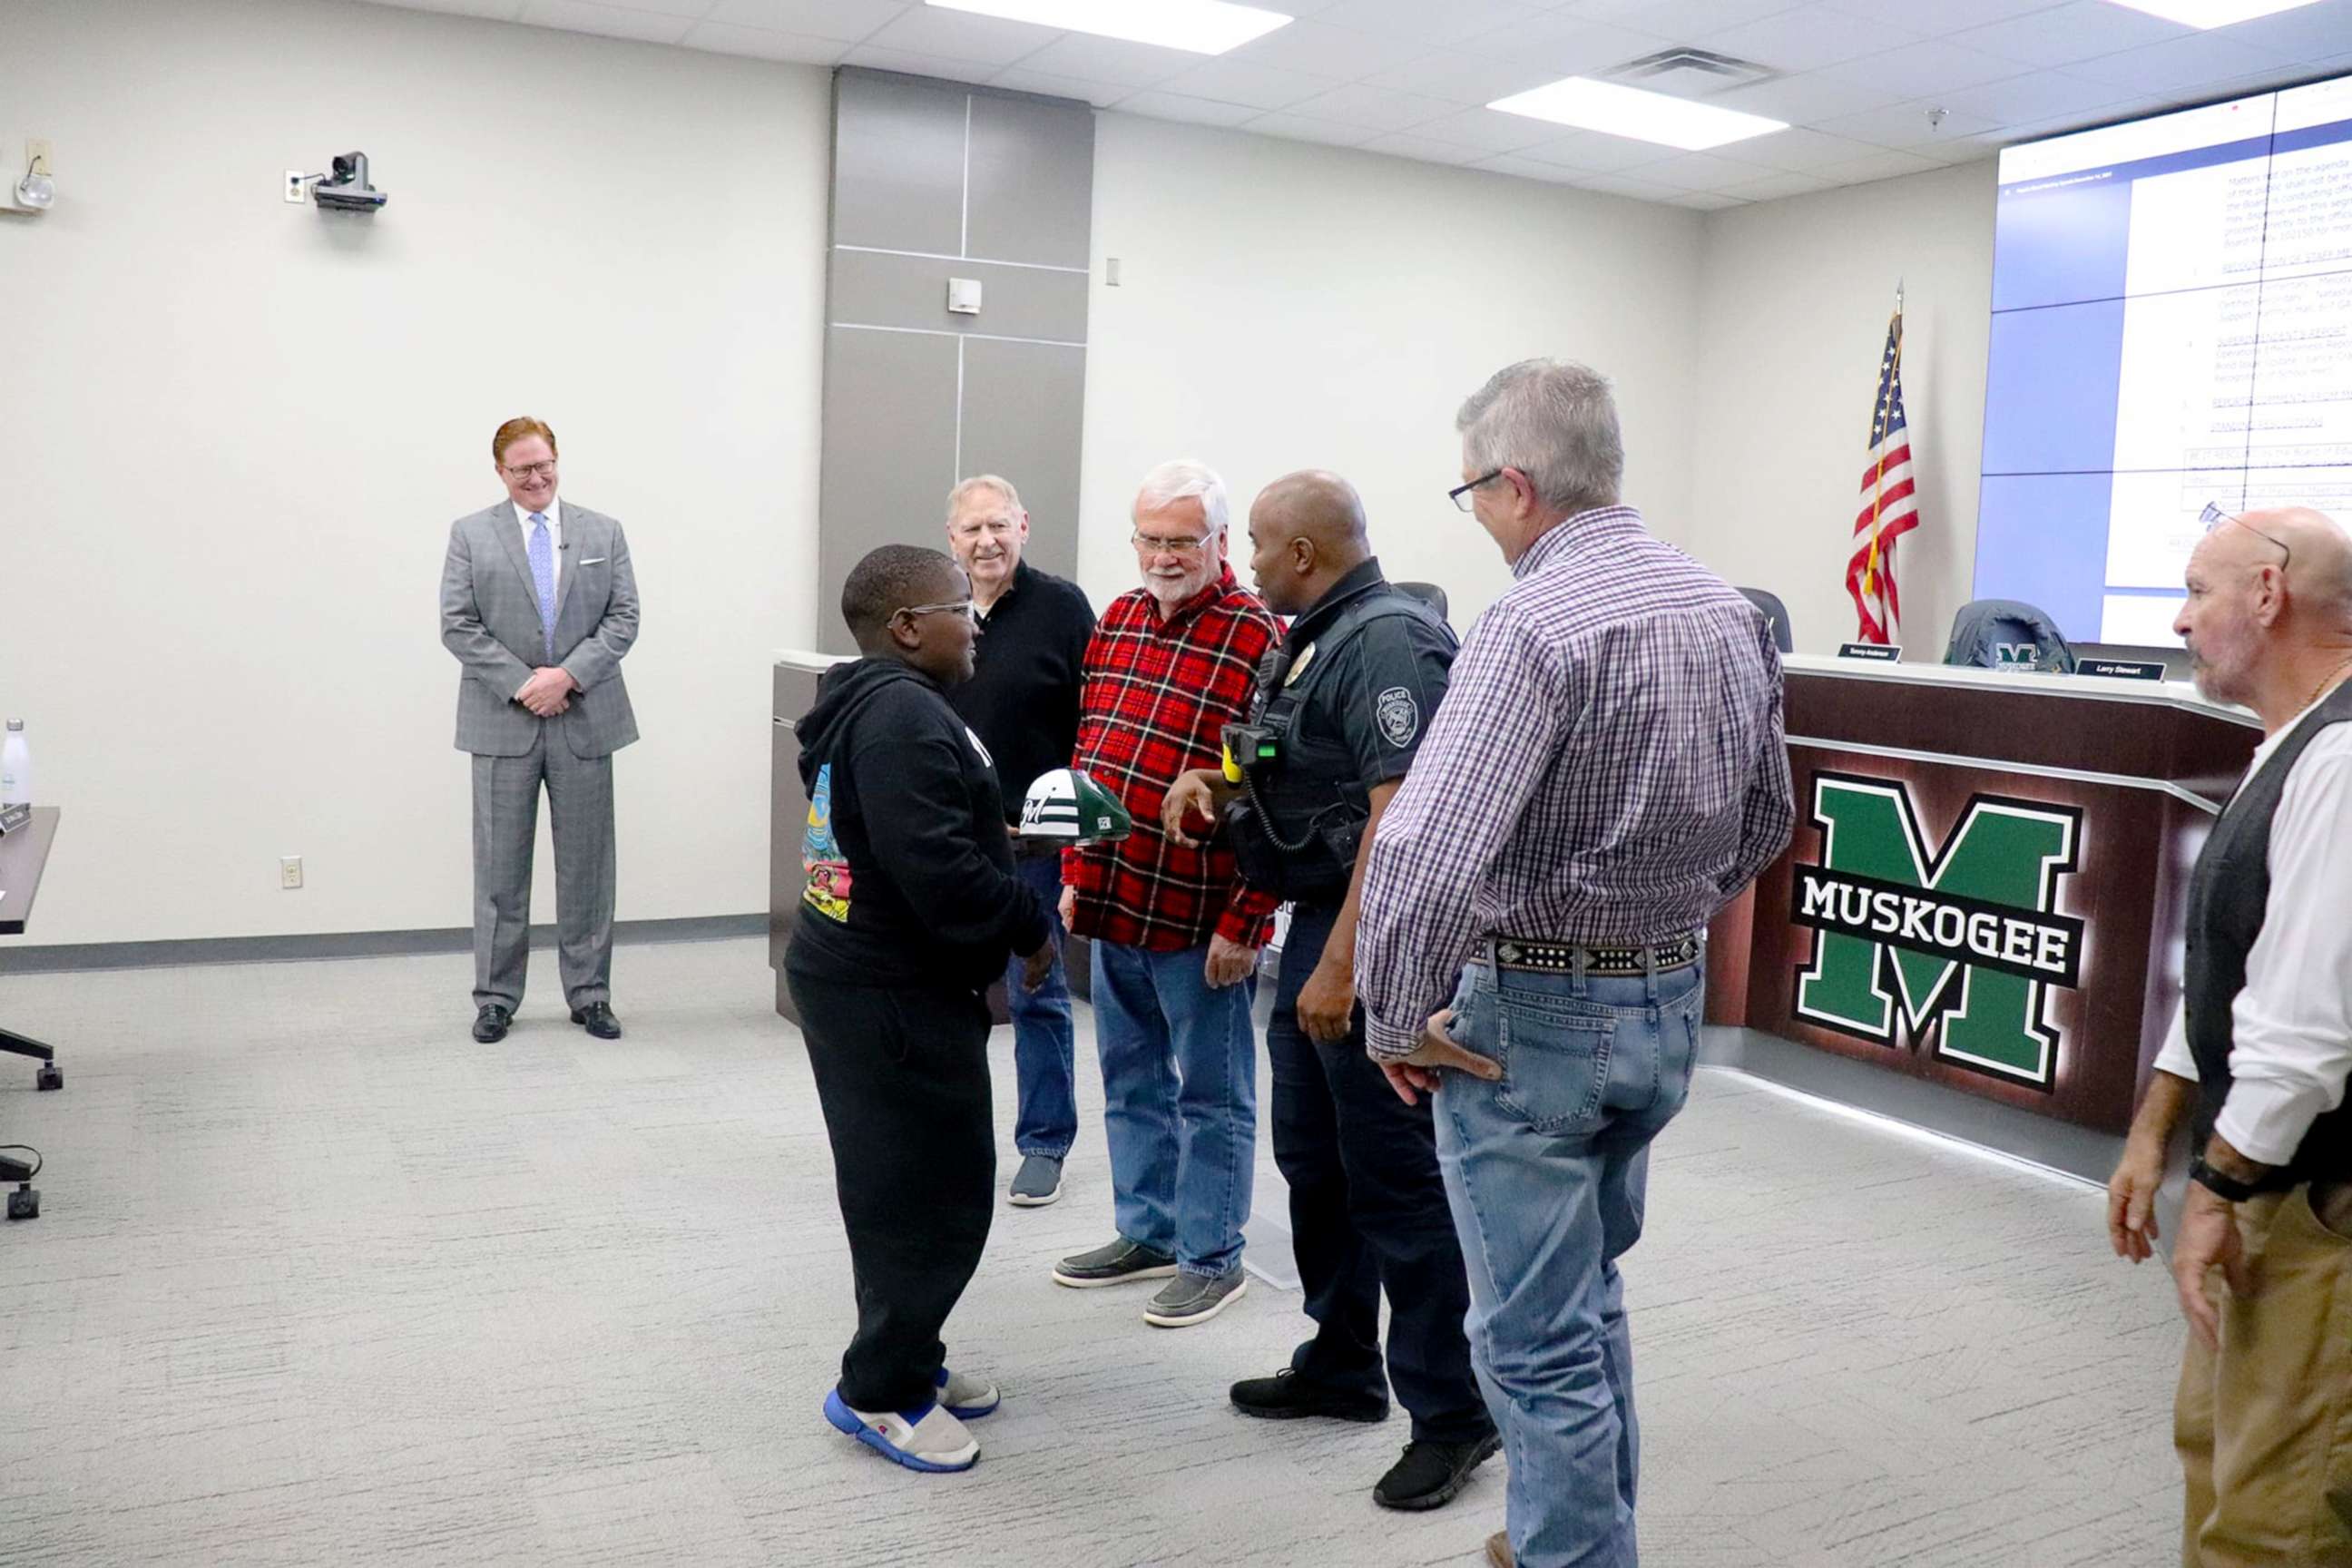 PHOTO: Sixth grader Davyon Johnson is honored Muskogee Public Schools, the Police Department, and the County Sheriff's Department in Muskogee, Okla., Dec. 14, 2021.